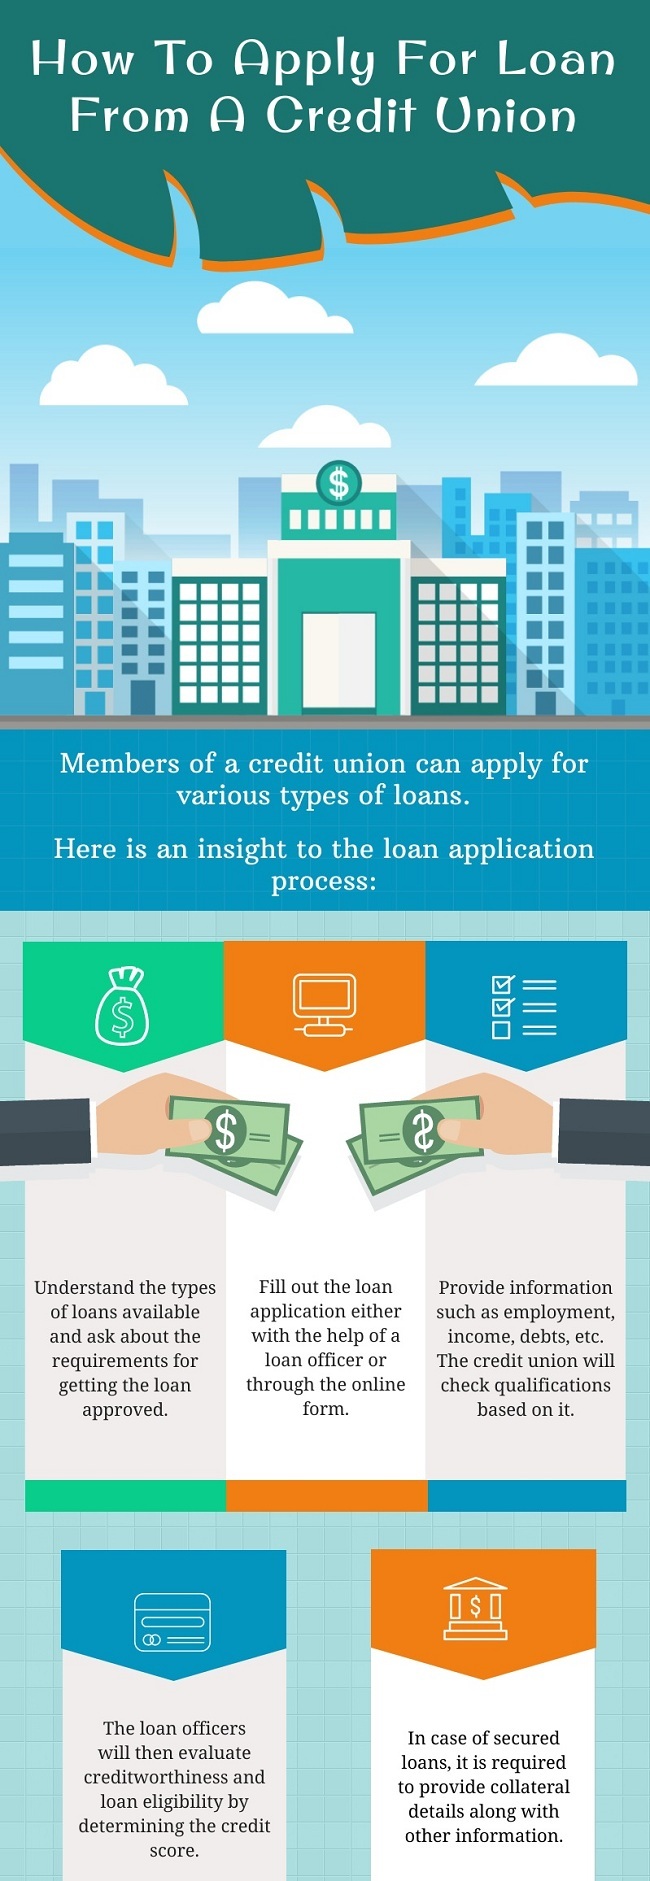 GCTFCU Blog | How To Apply For Loan From A Credit Union